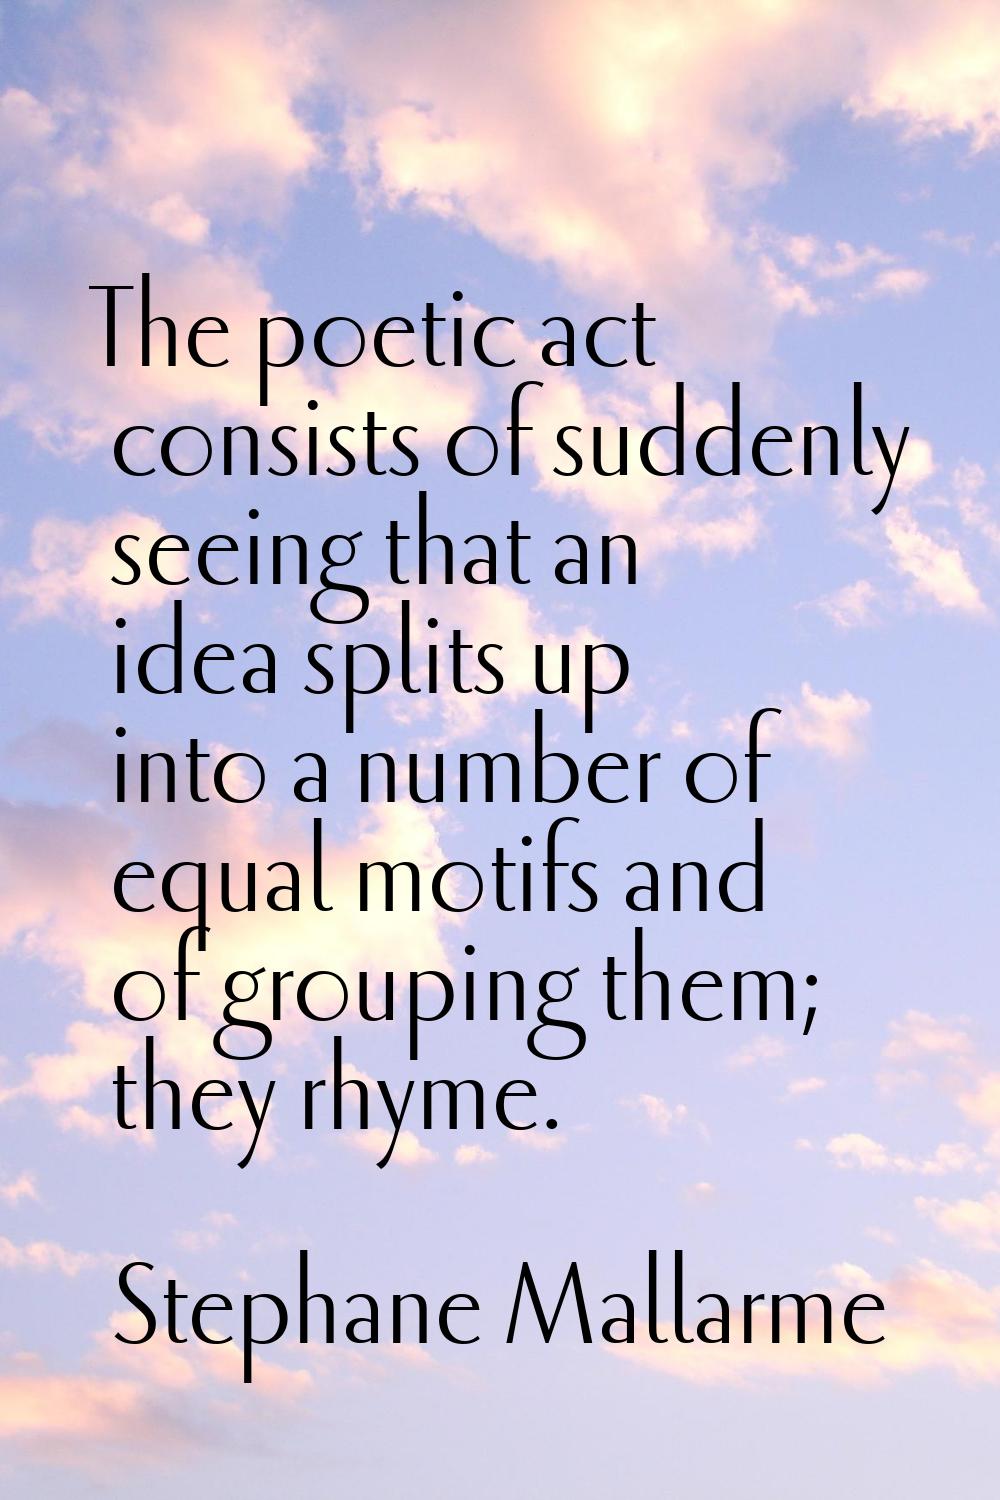 The poetic act consists of suddenly seeing that an idea splits up into a number of equal motifs and